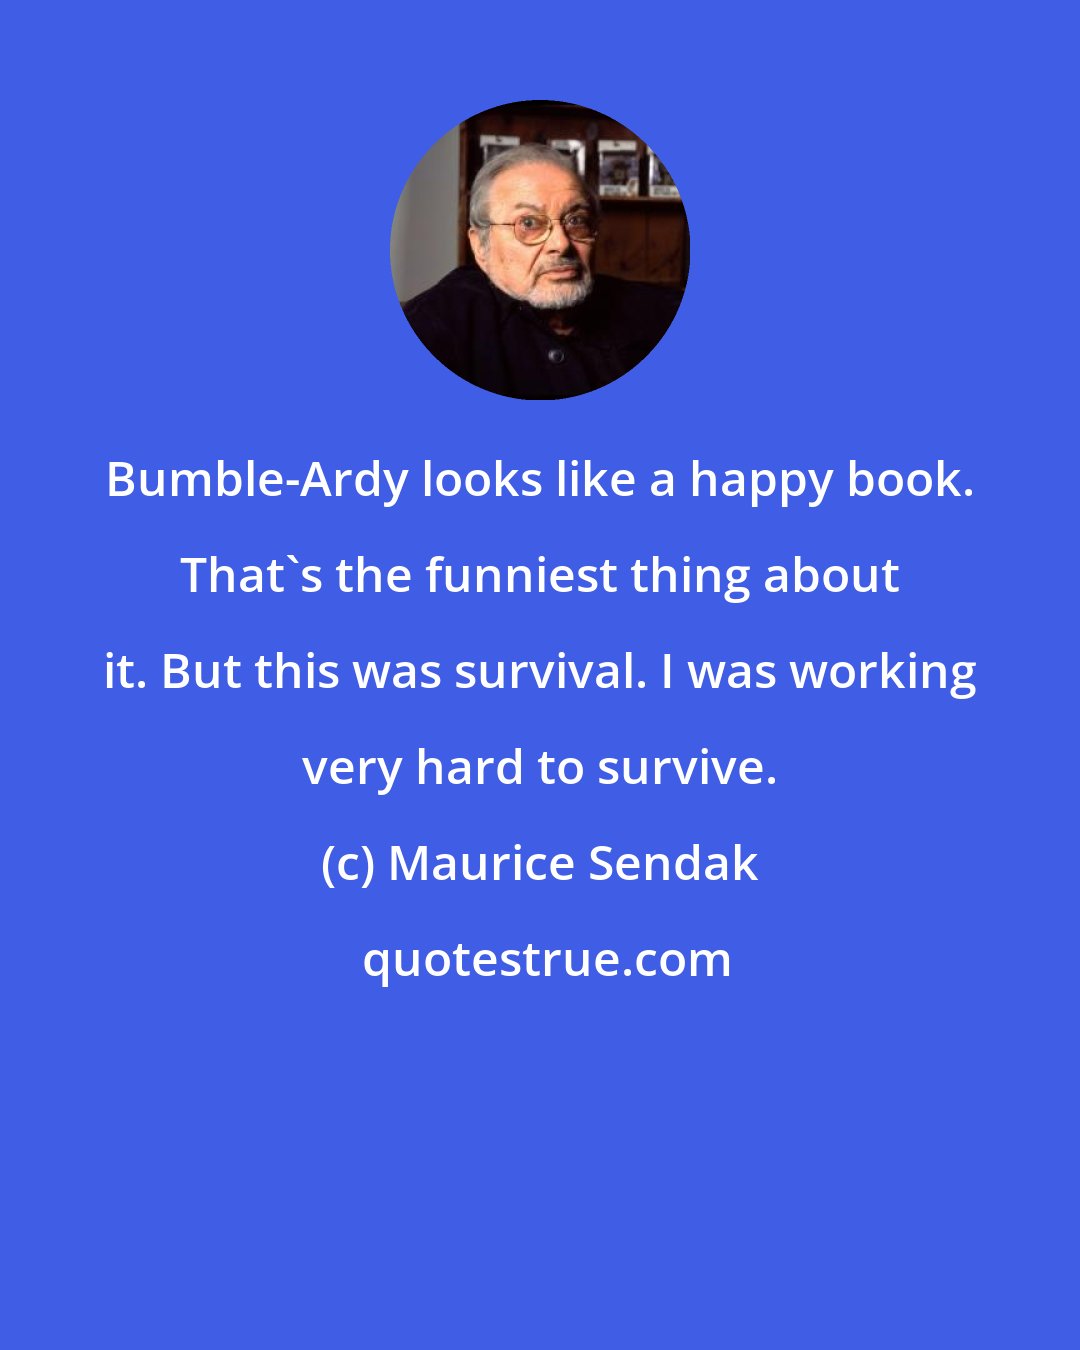 Maurice Sendak: Bumble-Ardy looks like a happy book. That's the funniest thing about it. But this was survival. I was working very hard to survive.